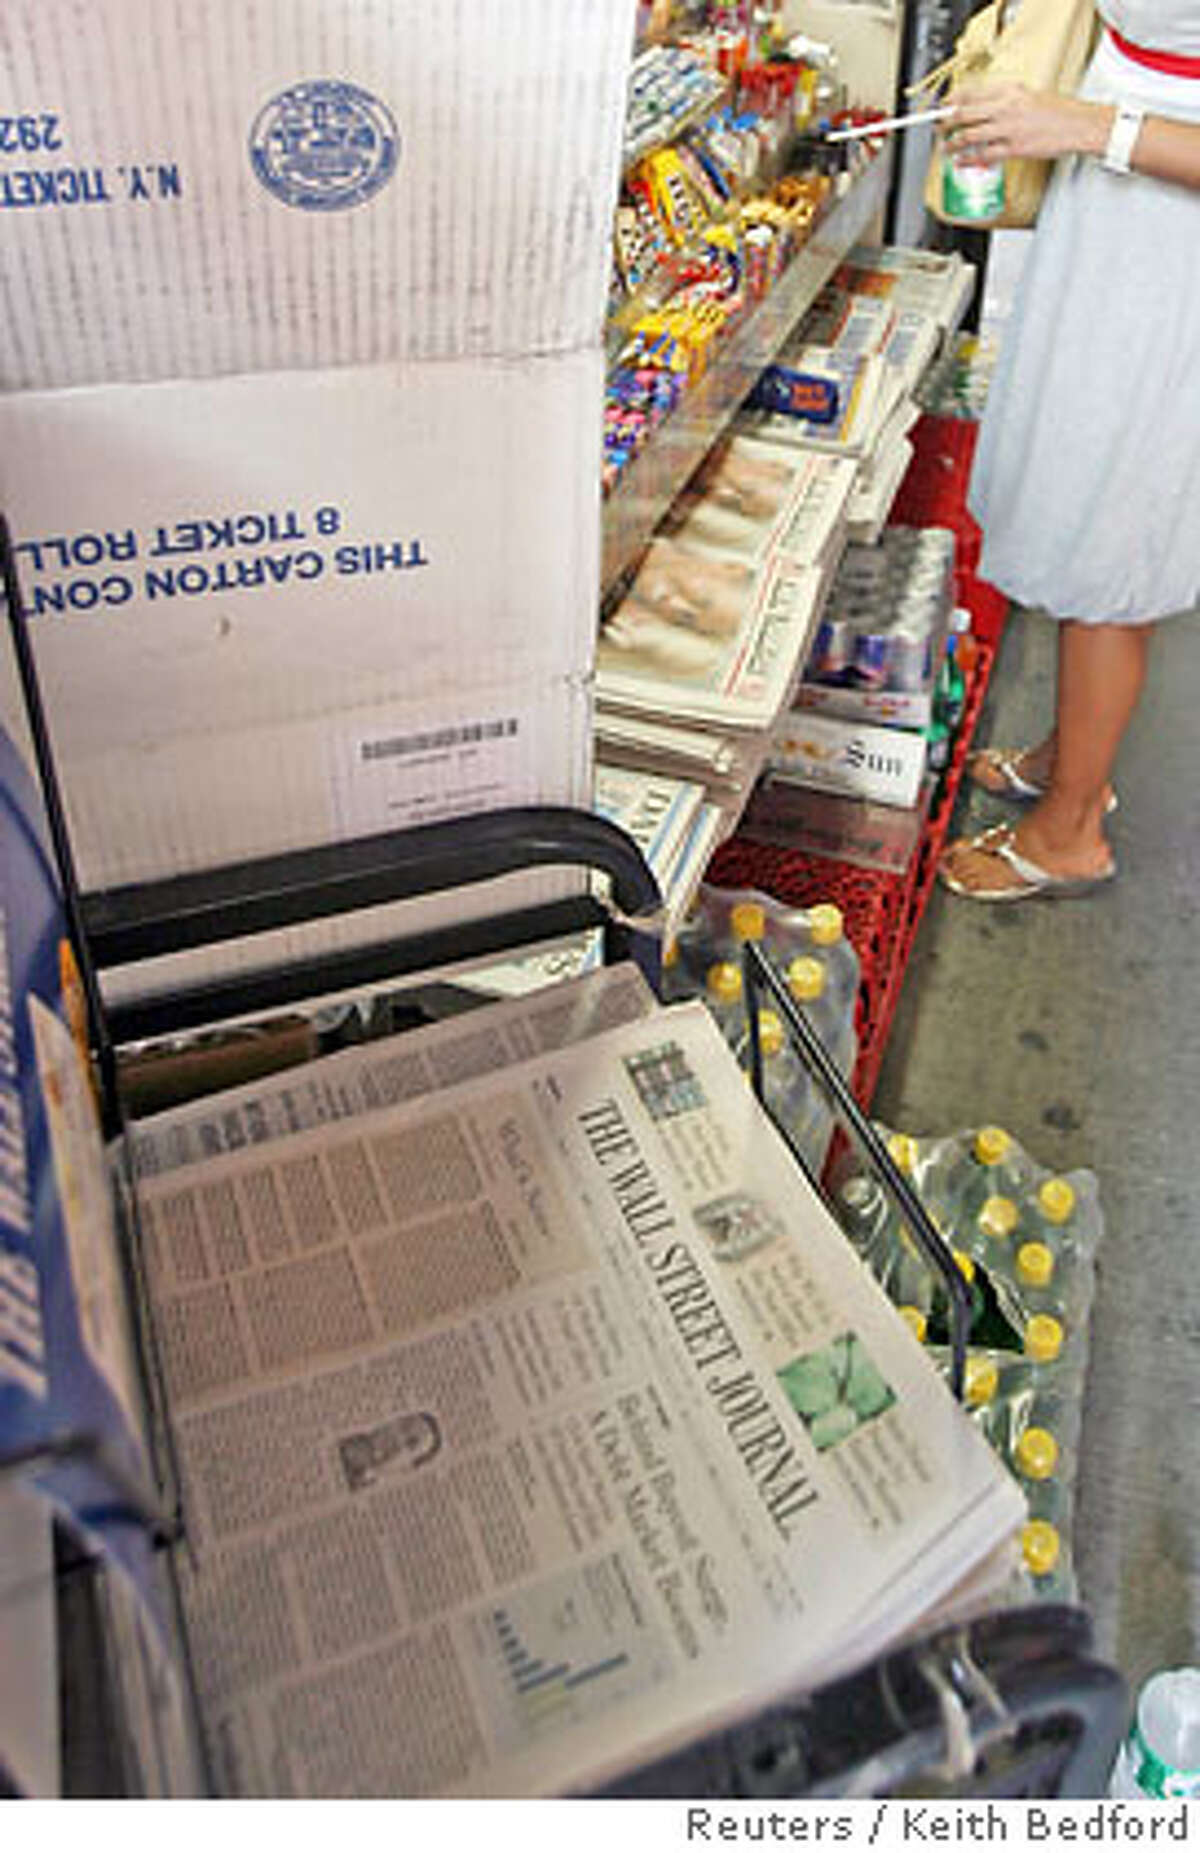 A copy of the Wall Street Journal is pictured in a newsstand in New York, June 26, 2007. Rupert Murdoch's News Corp. and Dow Jones & Co. Inc. have "basically agreed" on a structure to protect the editorial independence of Dow Jones' news operations, a source familiar with the matter said on Tuesday. News Corp. is offering $5 billion to buy Dow Jones. REUTERS/Keith Bedford (UNITED STATES)